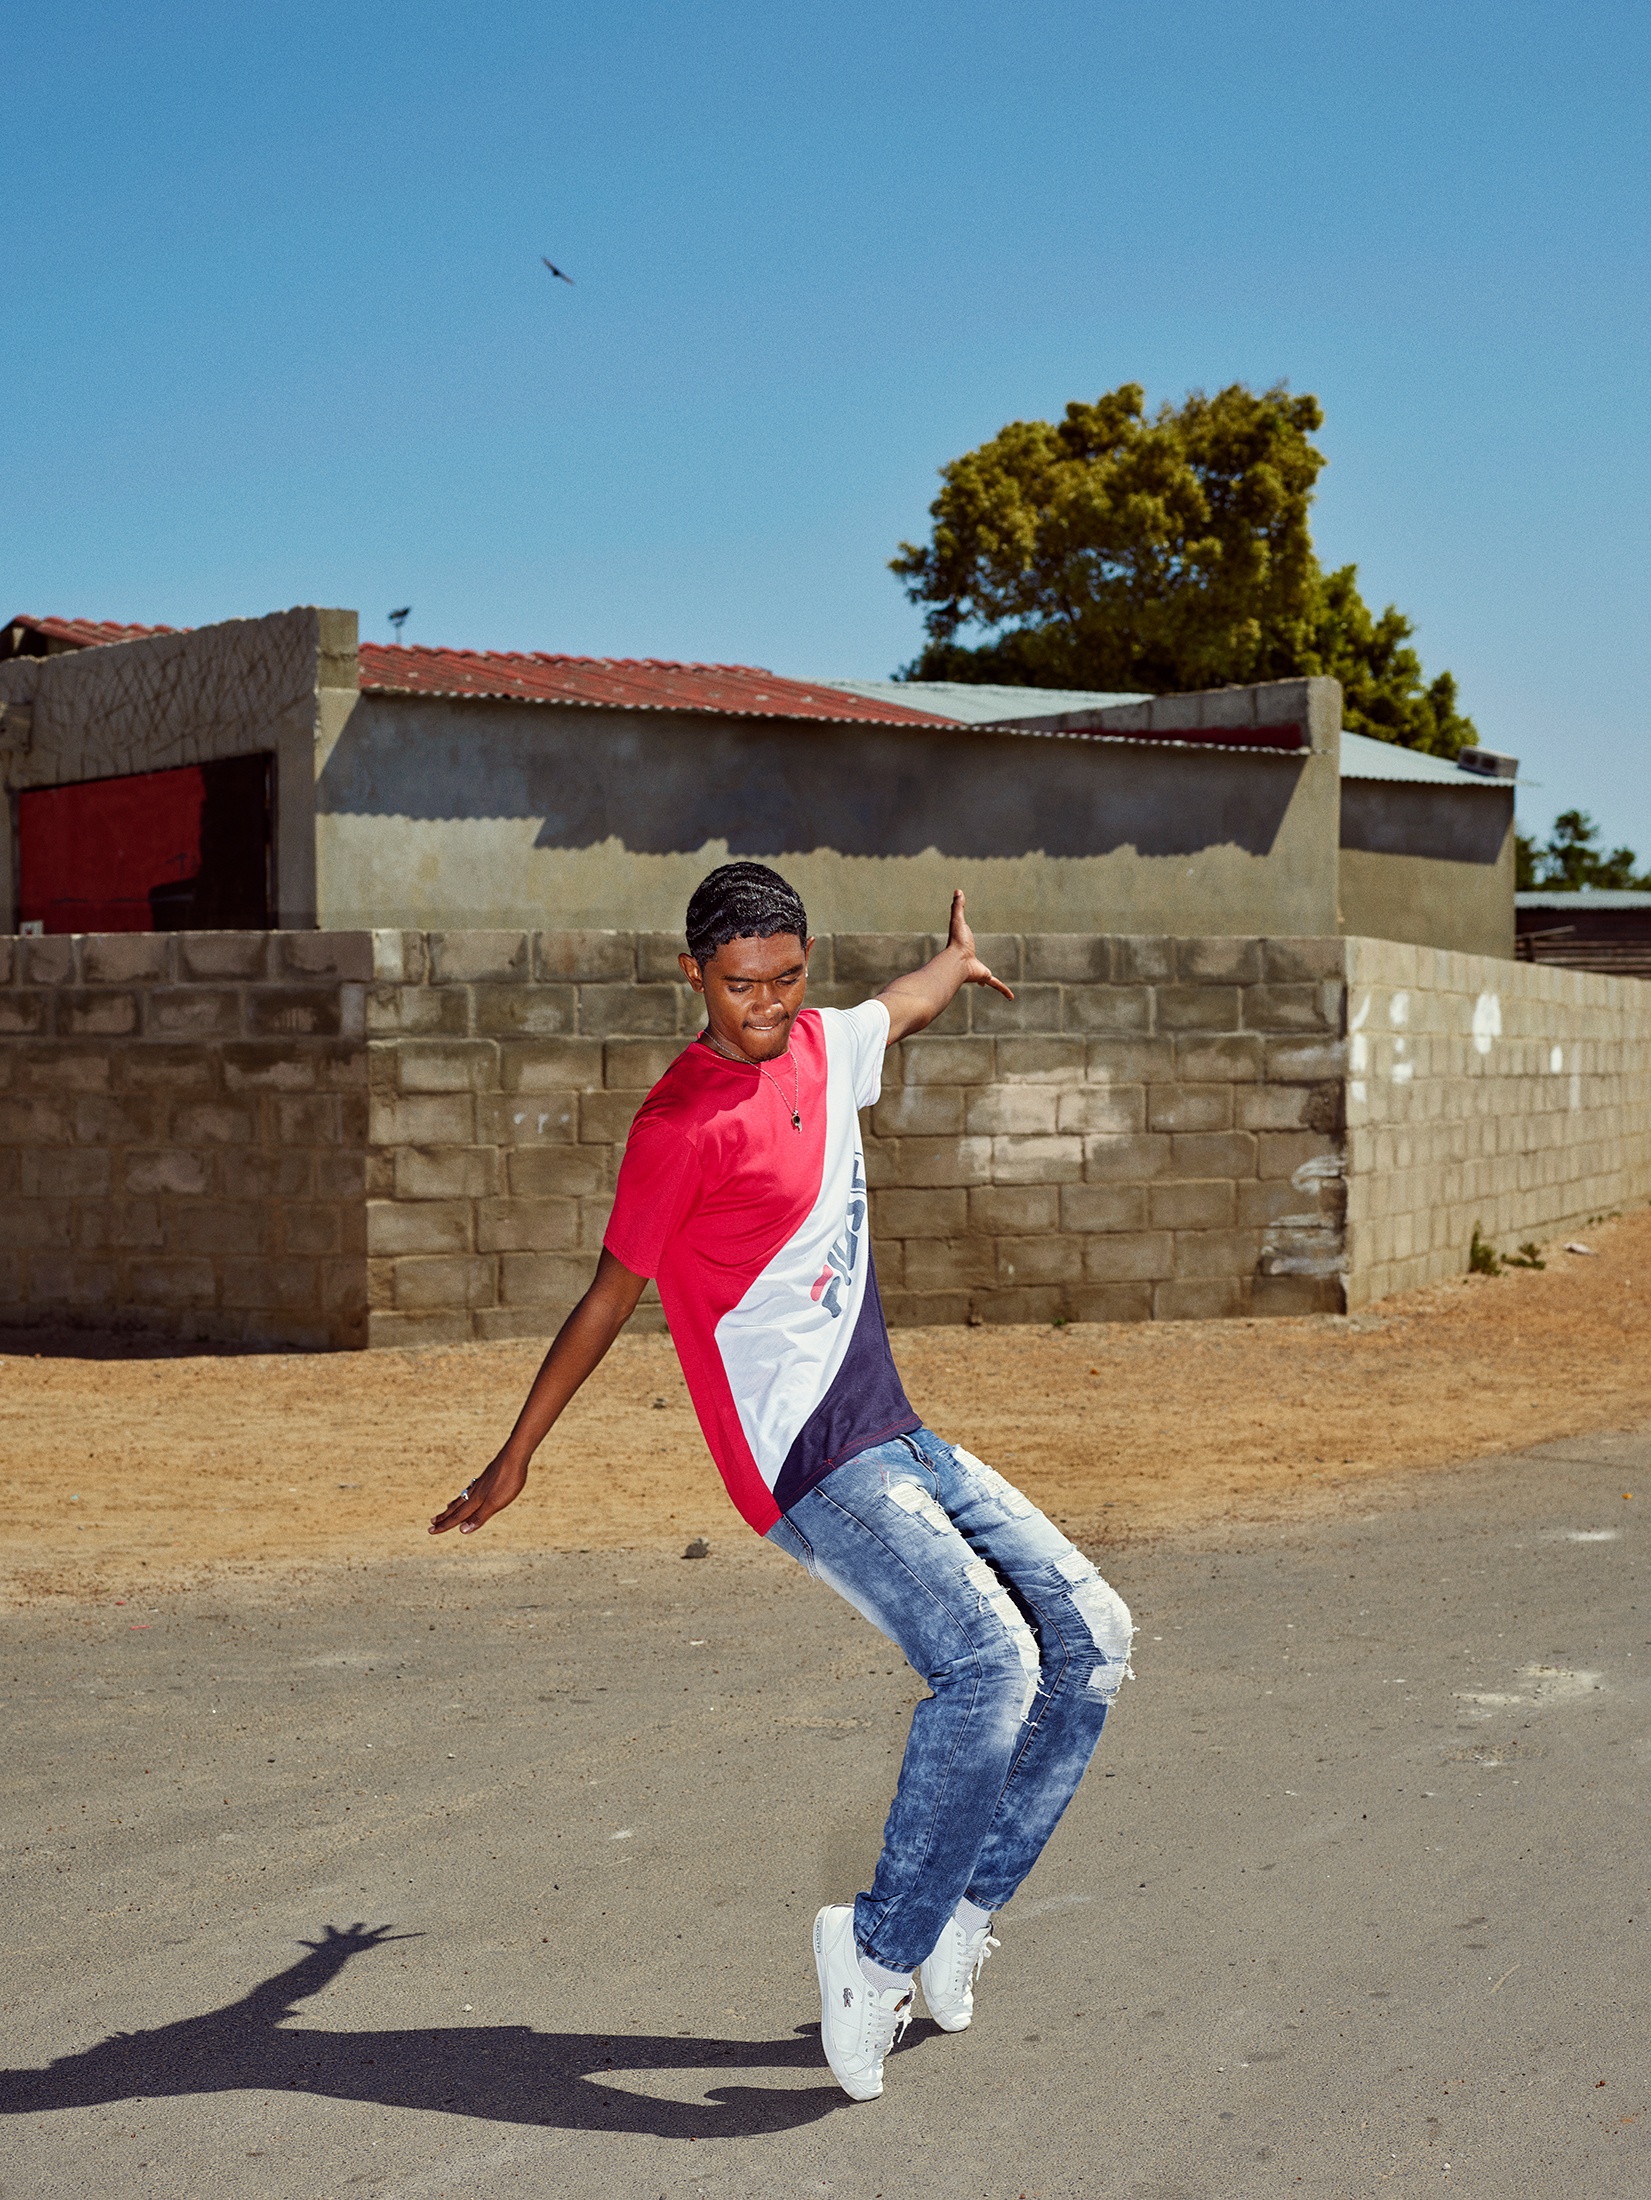 Photograph by Pieter Hugo, from A4’s ‘Atlantis Project’ exchange with the SWAGG United Dance Crew, that depicts a young person dancing in the street.
